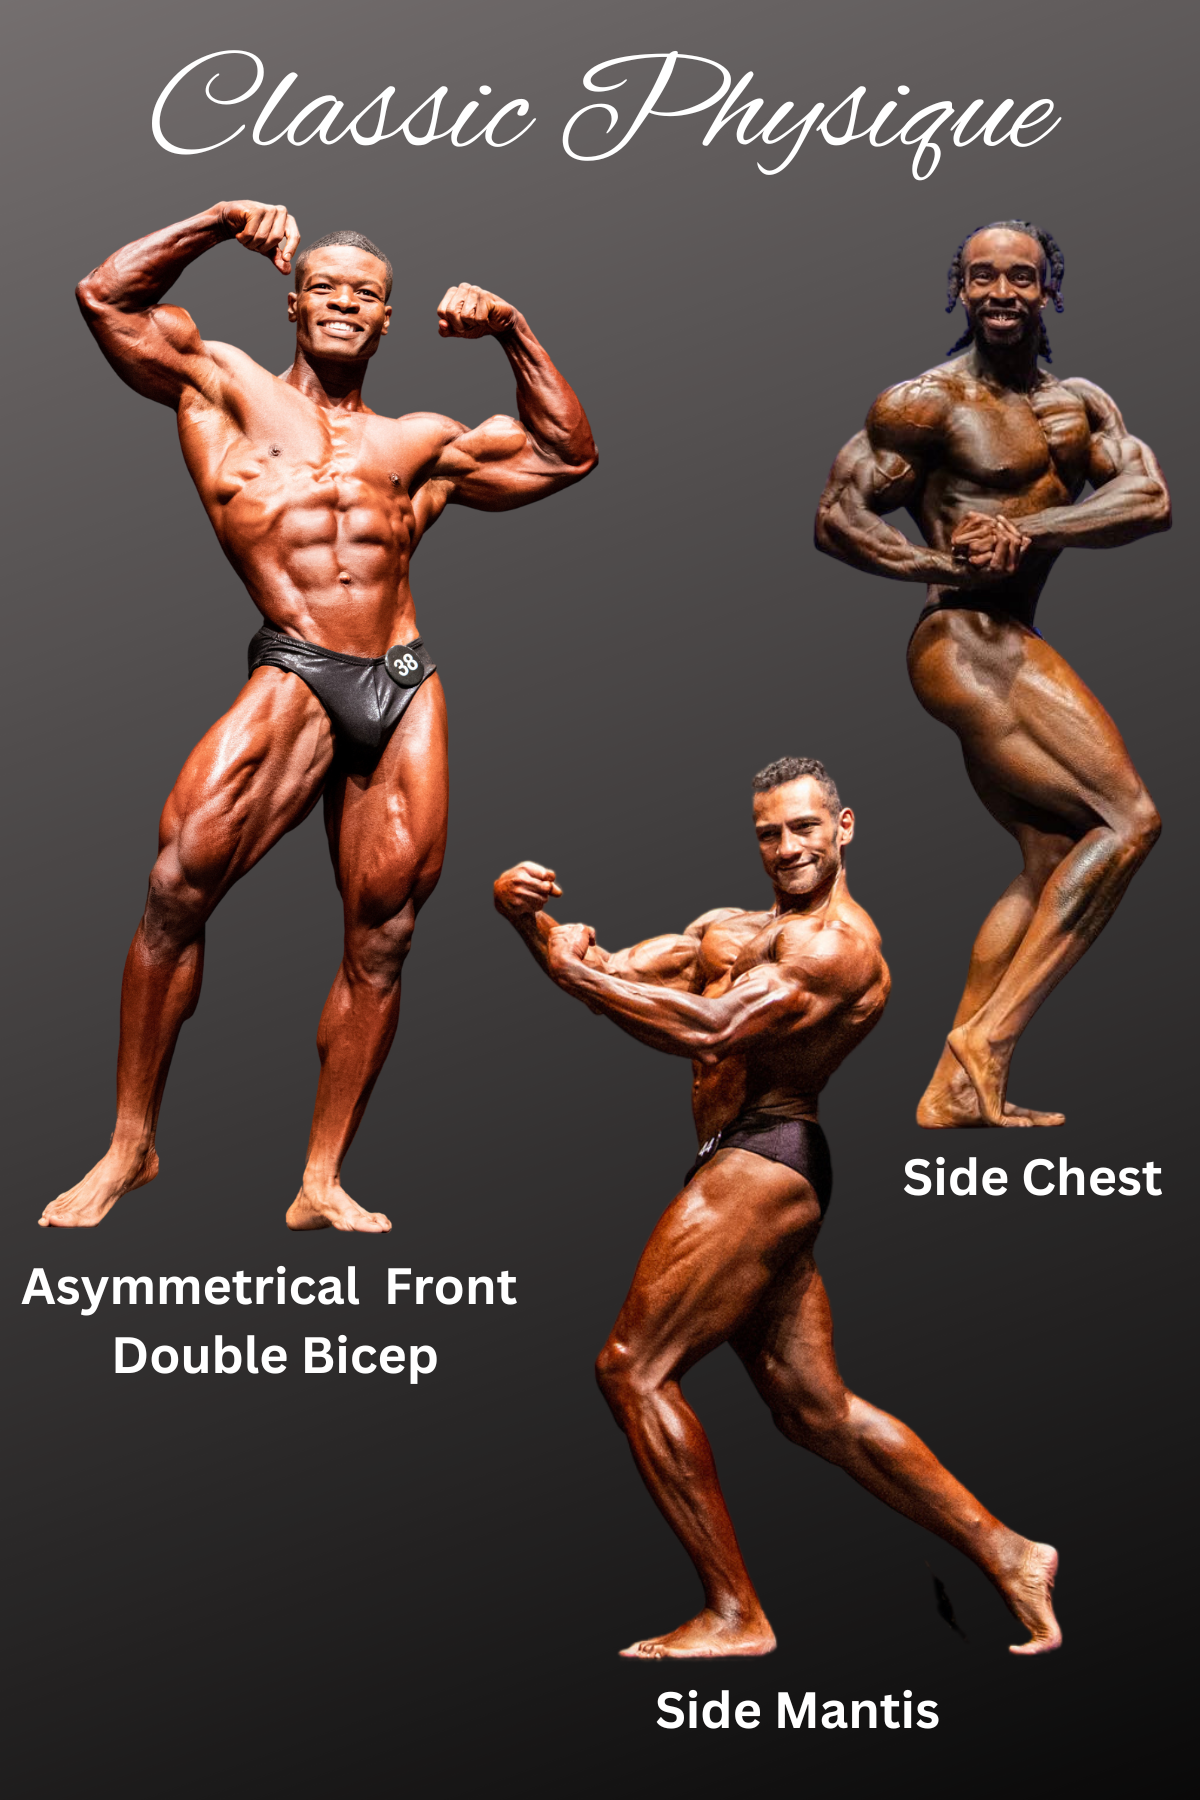 Best Most Muscular Pics - Competitive Bodybuilding - COMMUNITY - T NATION